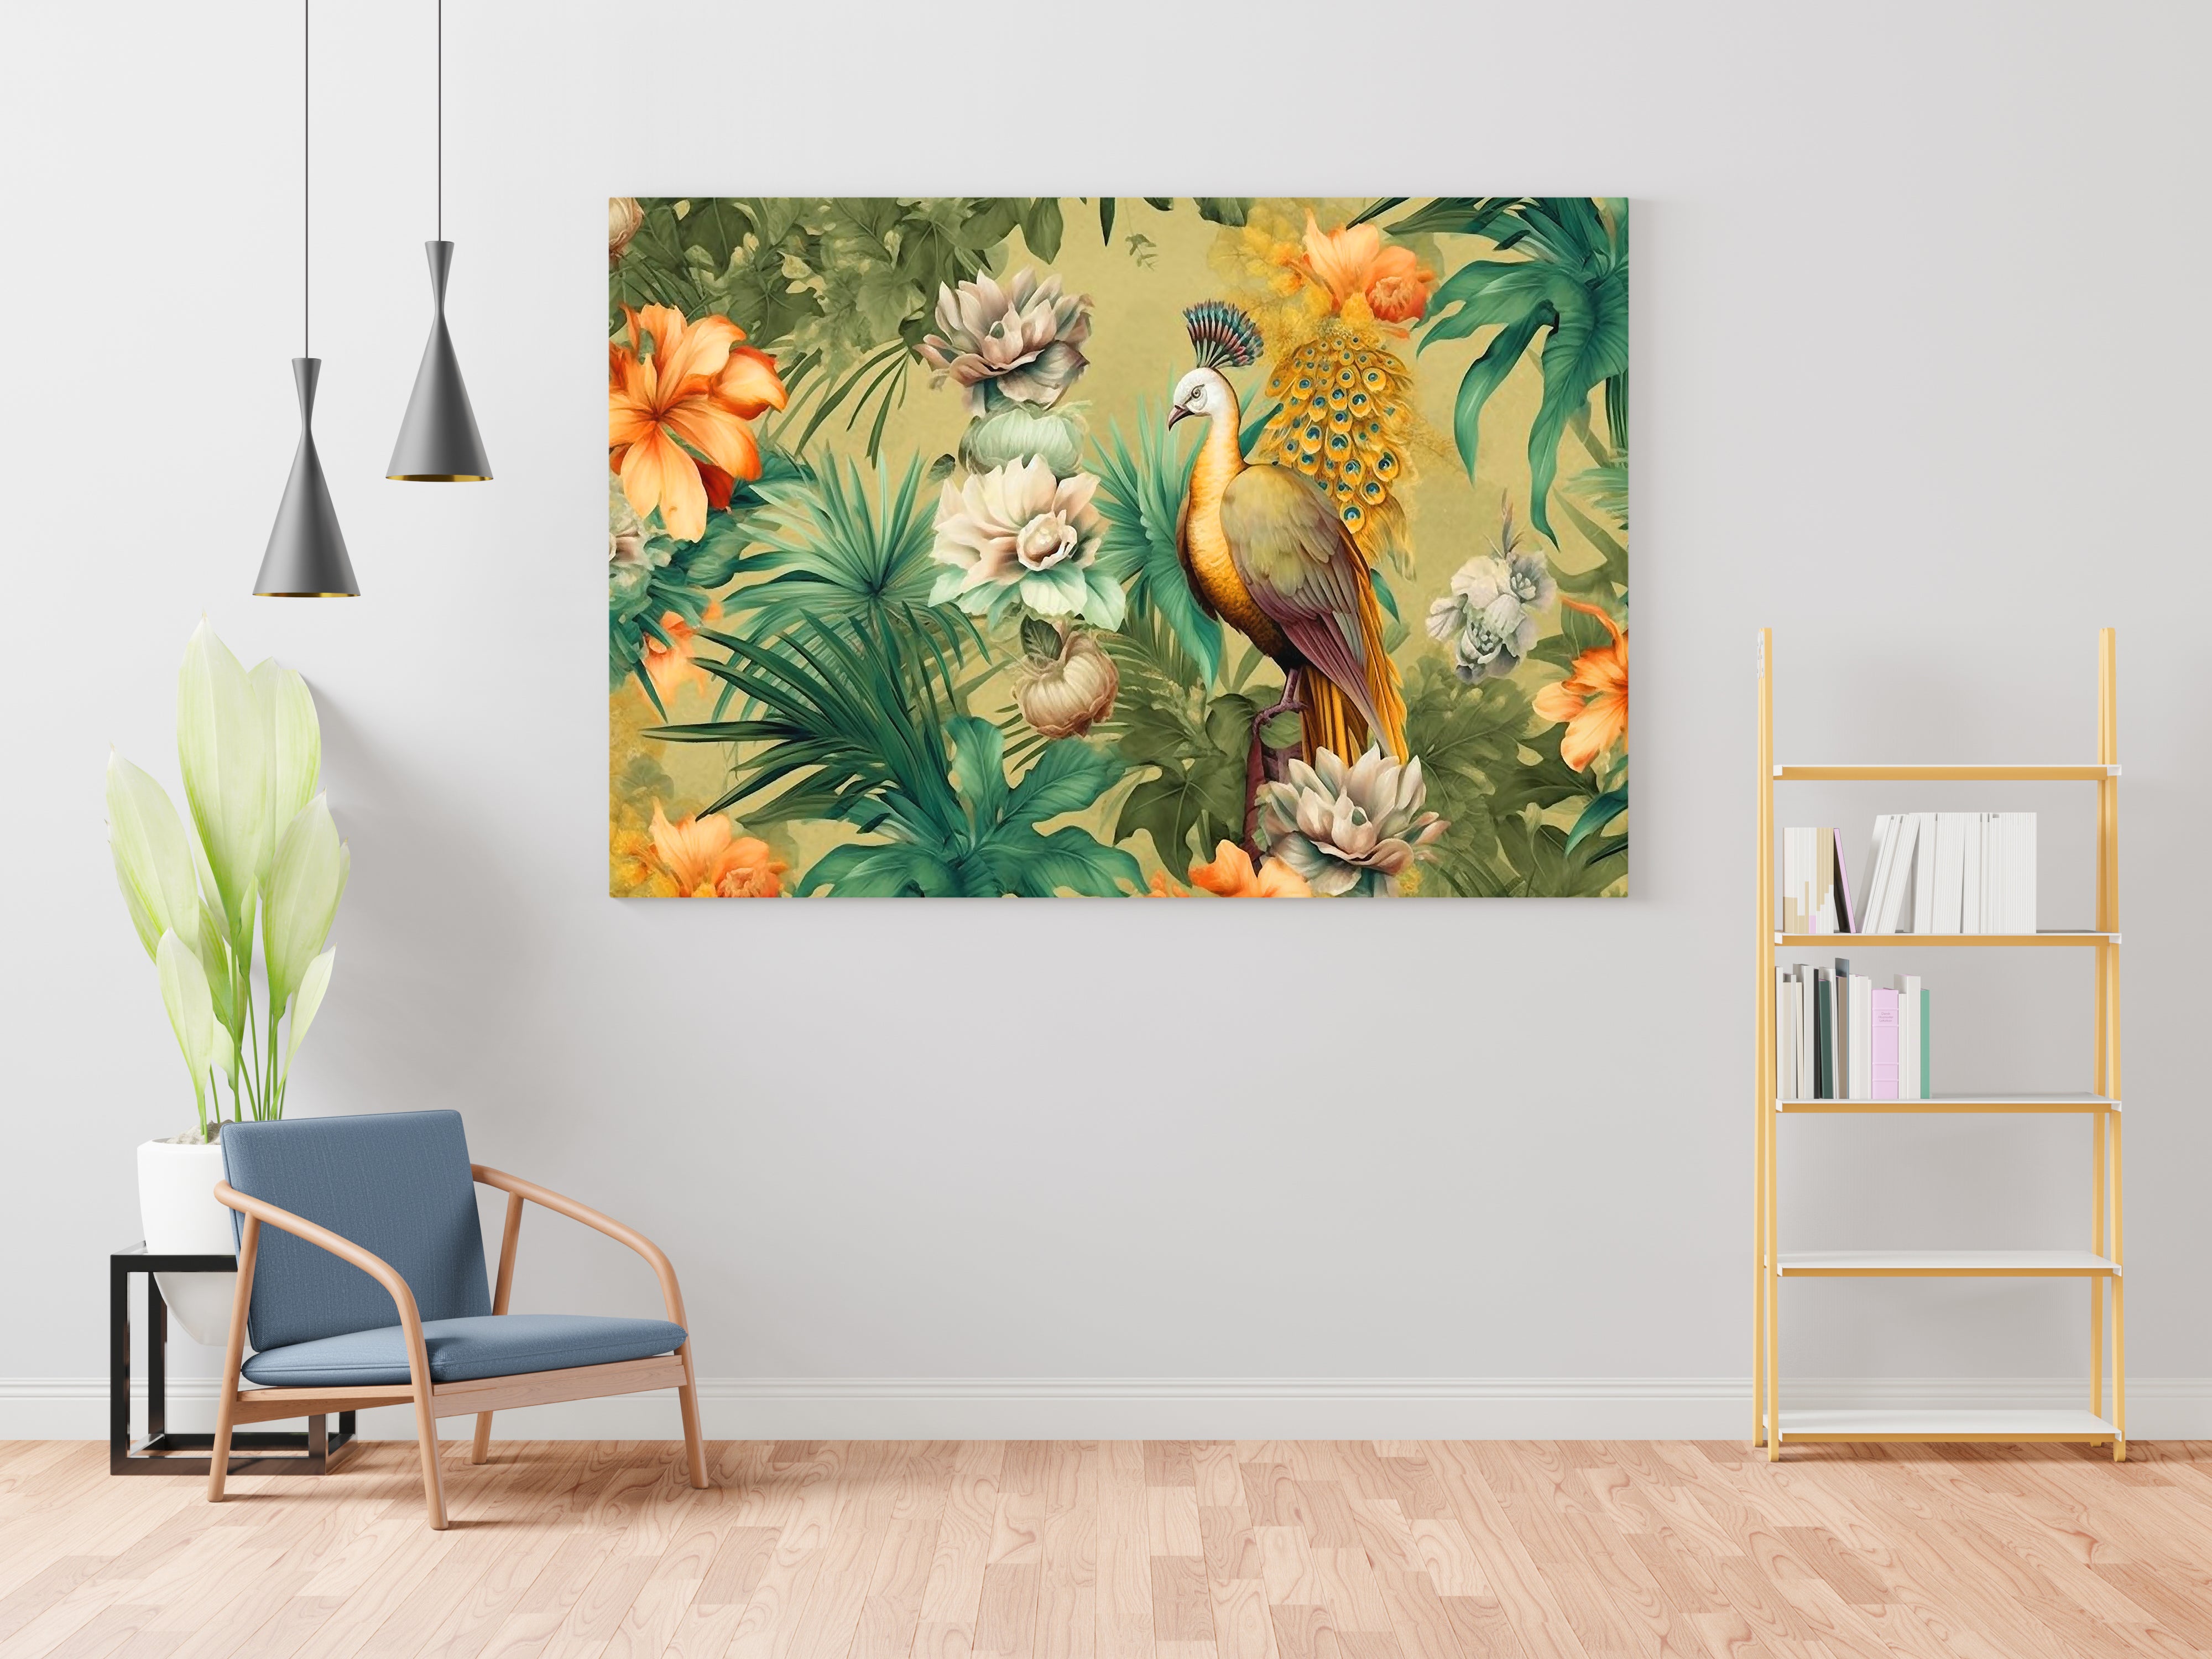 Peacock and Flowers Abstract Art Canvas Wall Painting